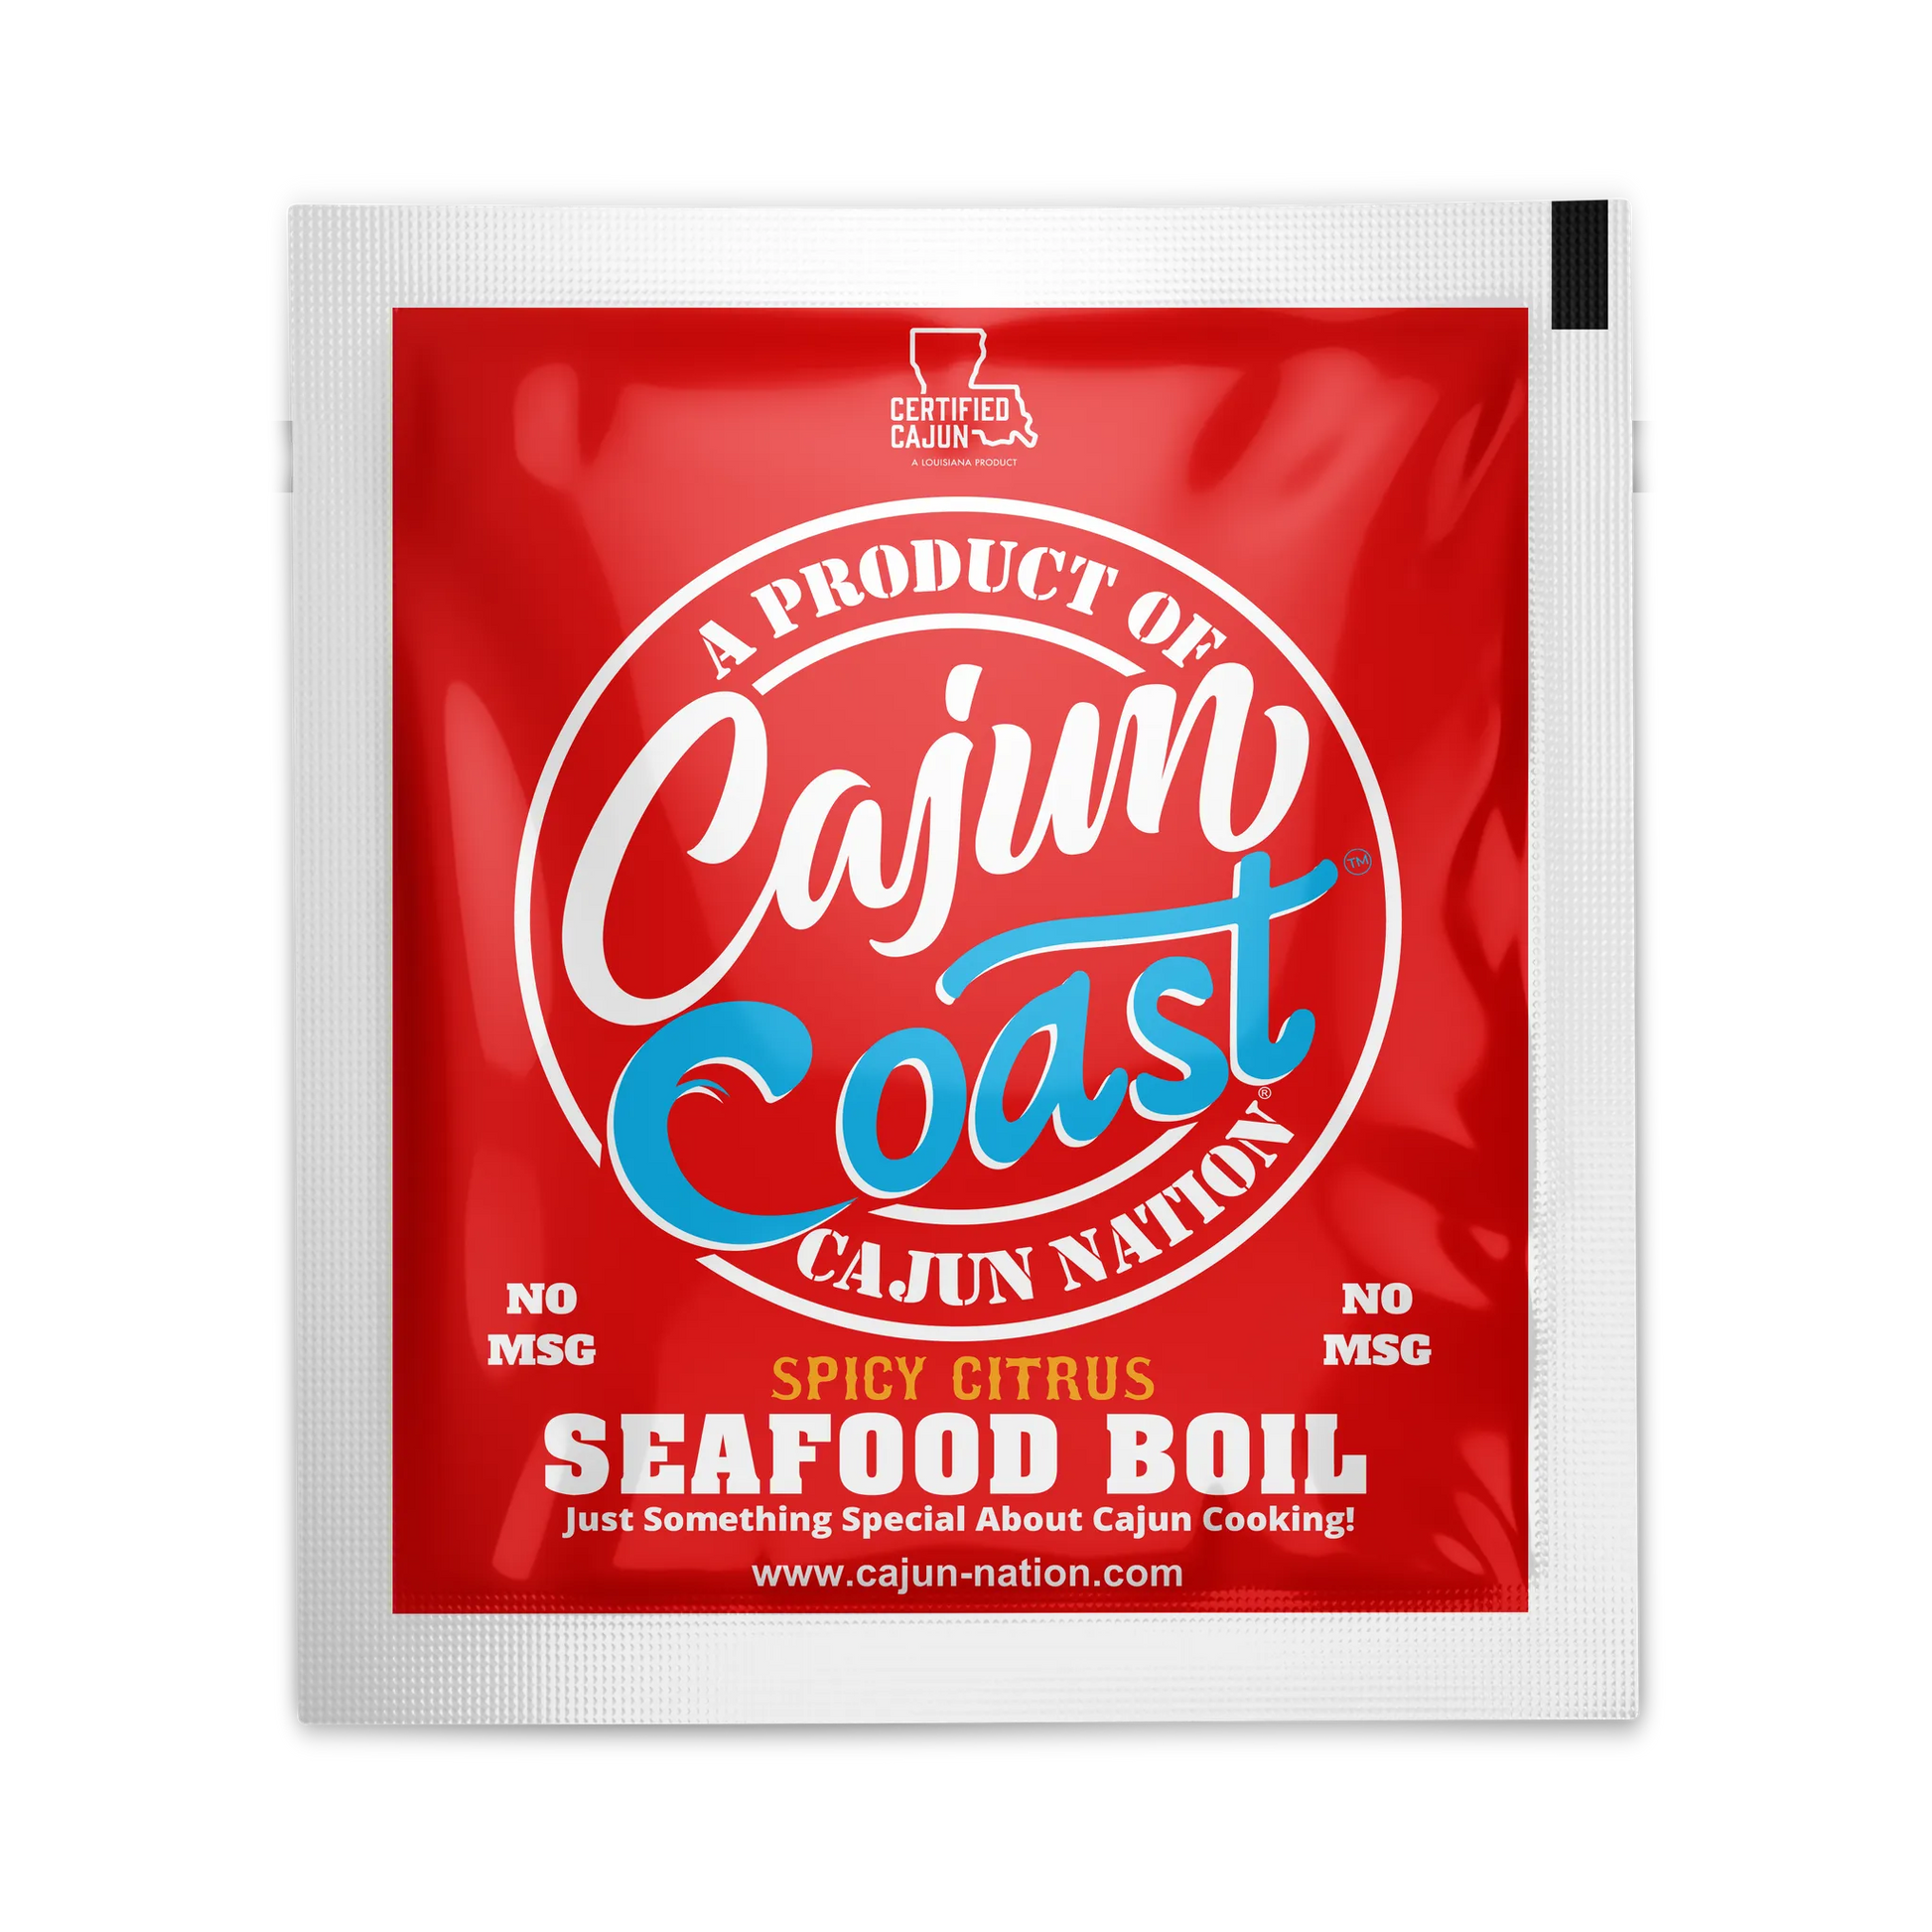 Cajun Nation Cajun Coast Spicy Citrus Seafood Boil Seasoning Packets with No MSG and Gluten-Free is a Certified Cajun product.  Made in Cajun Nation, Louisiana along the Cajun Coast.